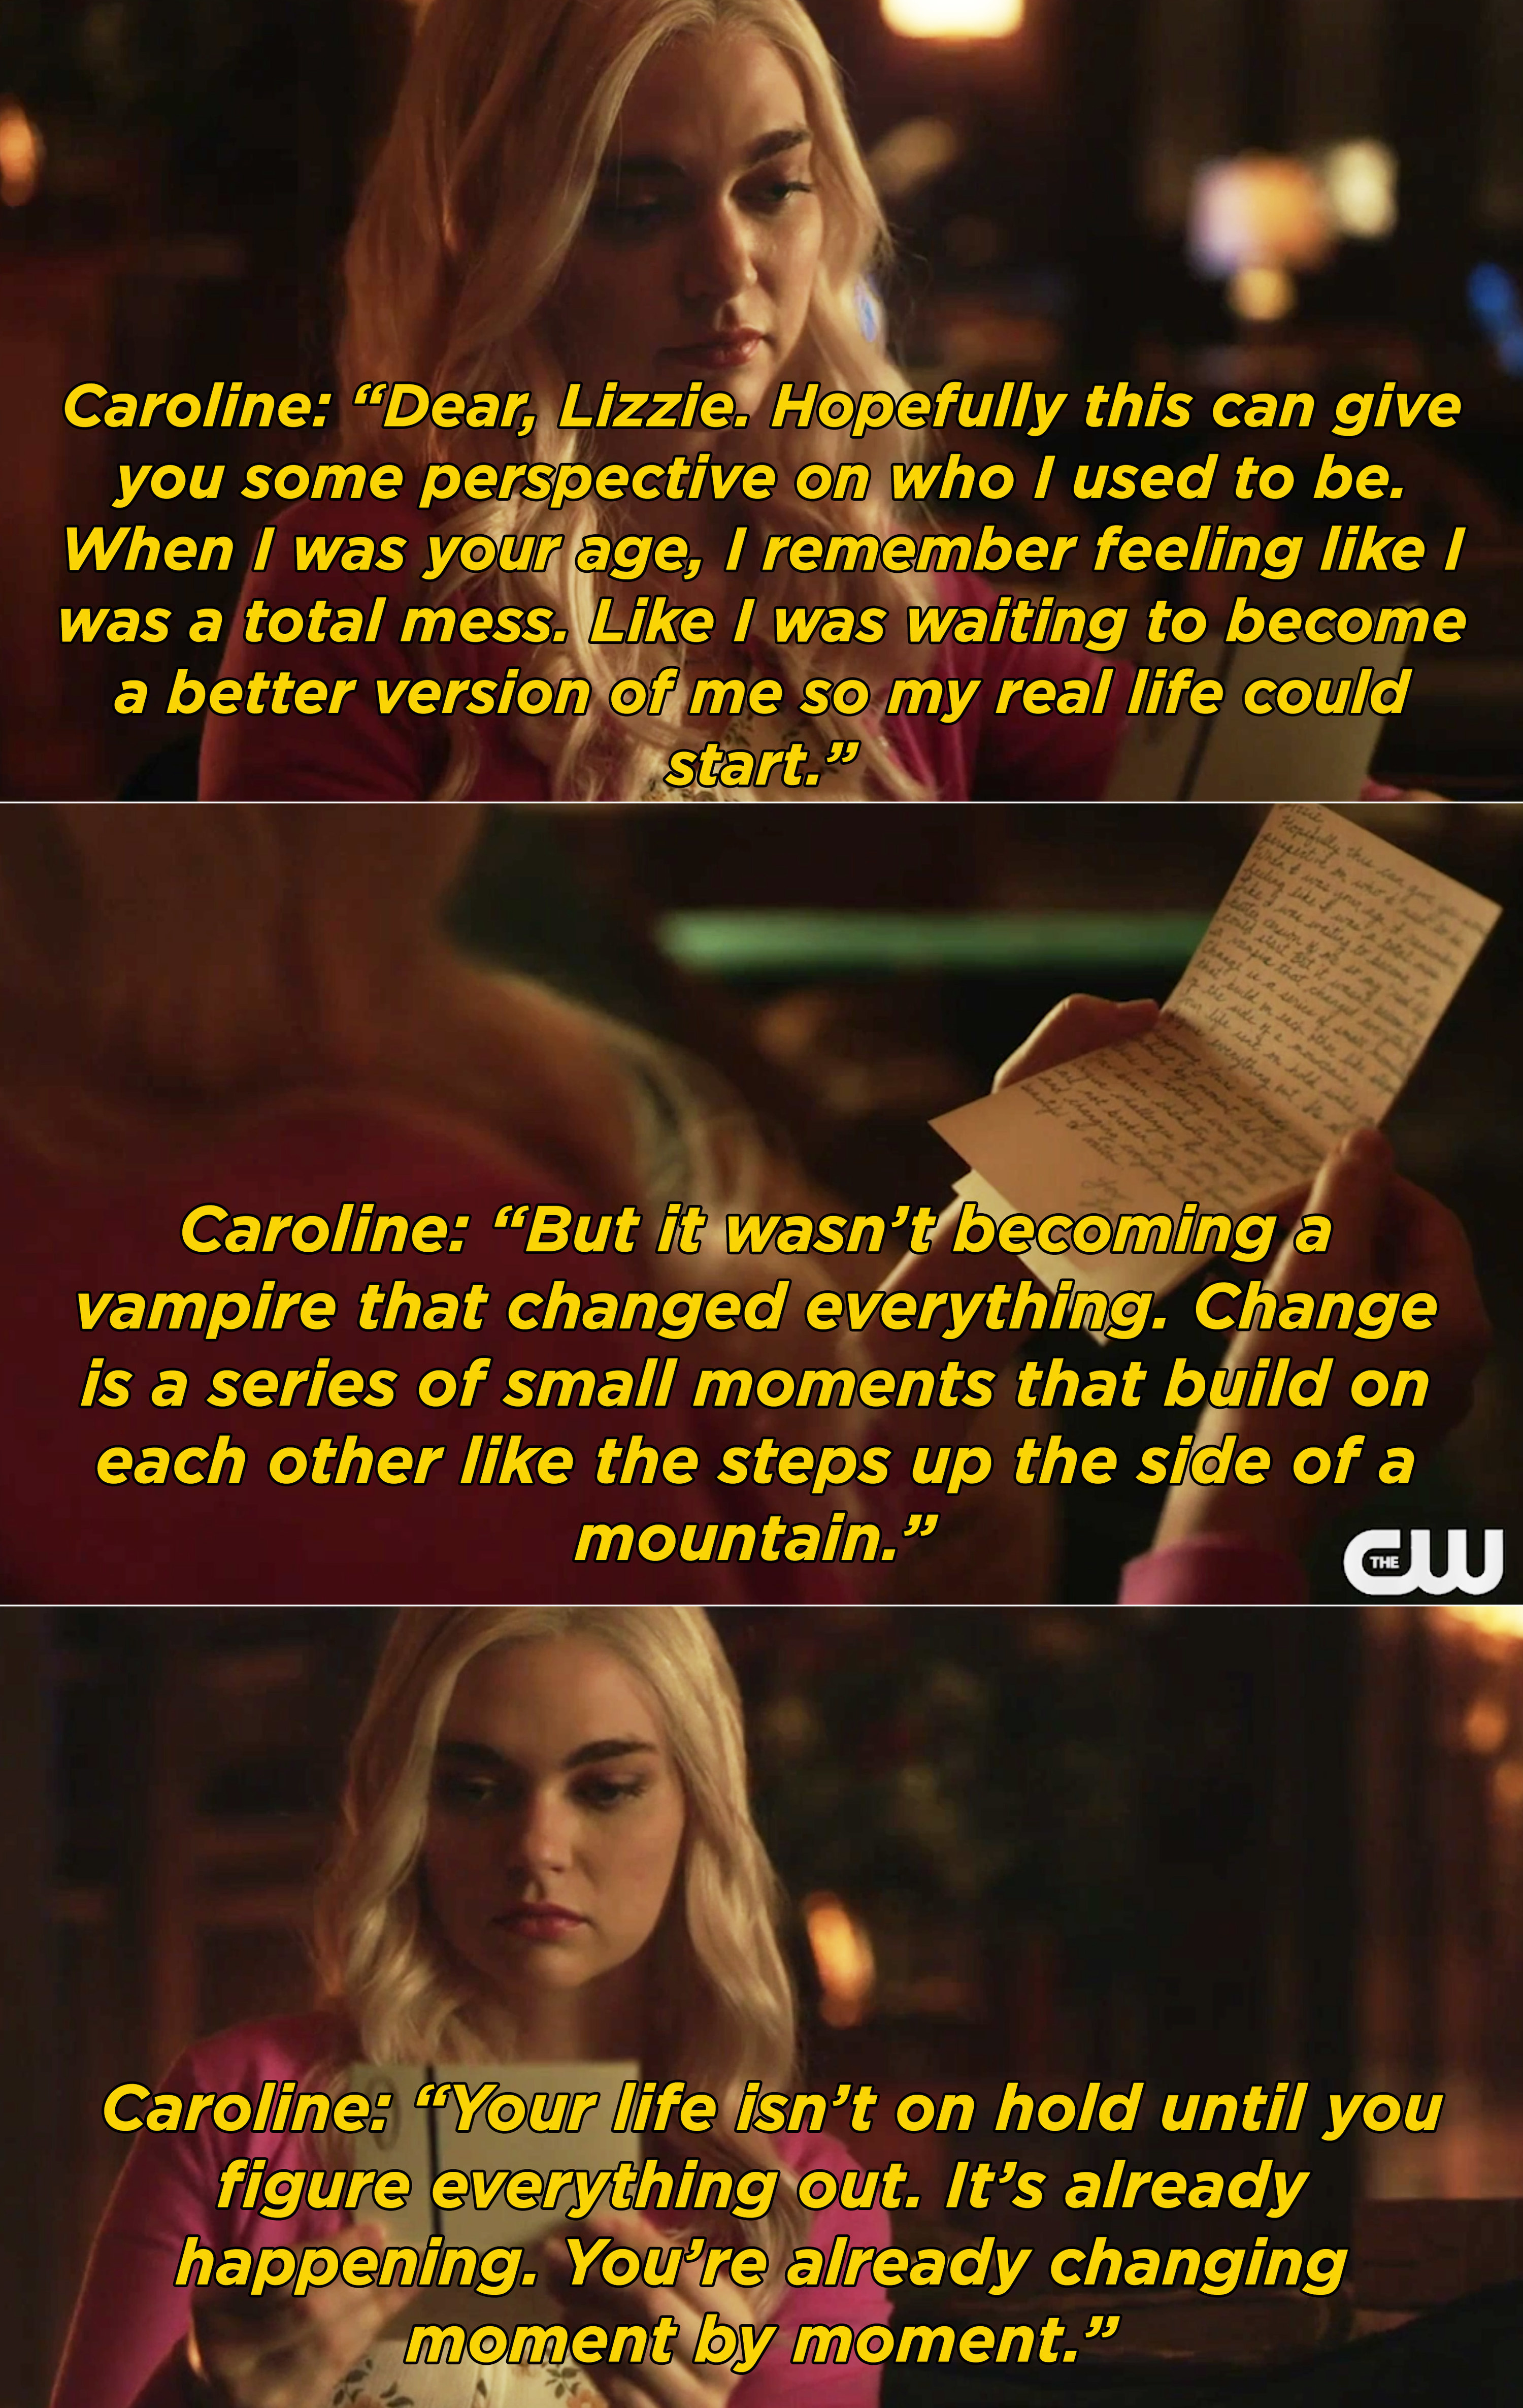 Caroline&#x27;s letter saying becoming a vampire didn&#x27;t change everything, she had to grown and change and build upon a &quot;series of small moments&quot; to become who she is today